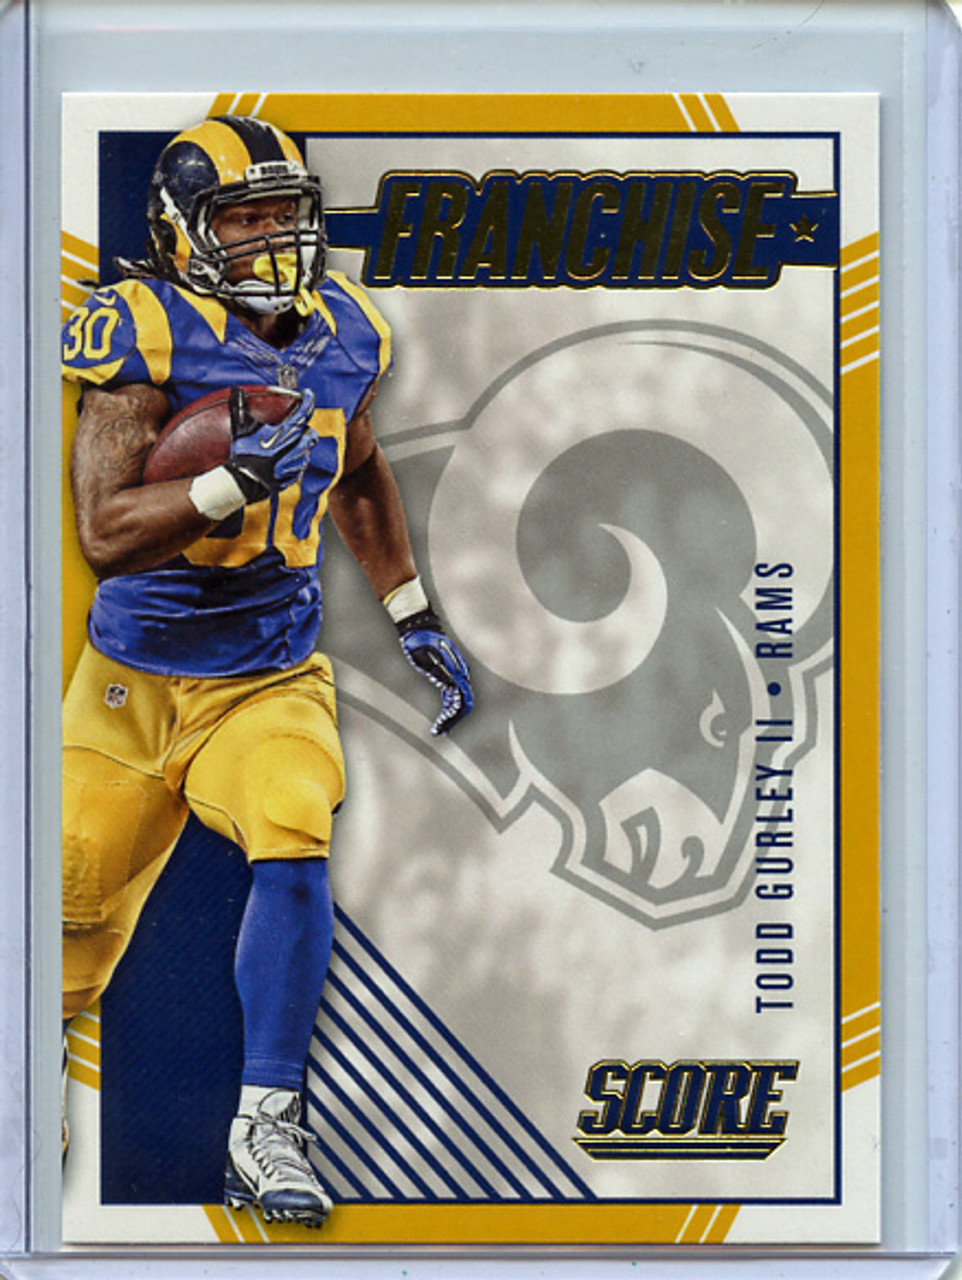 Todd Gurley 2016 Score, Franchise #30 Gold